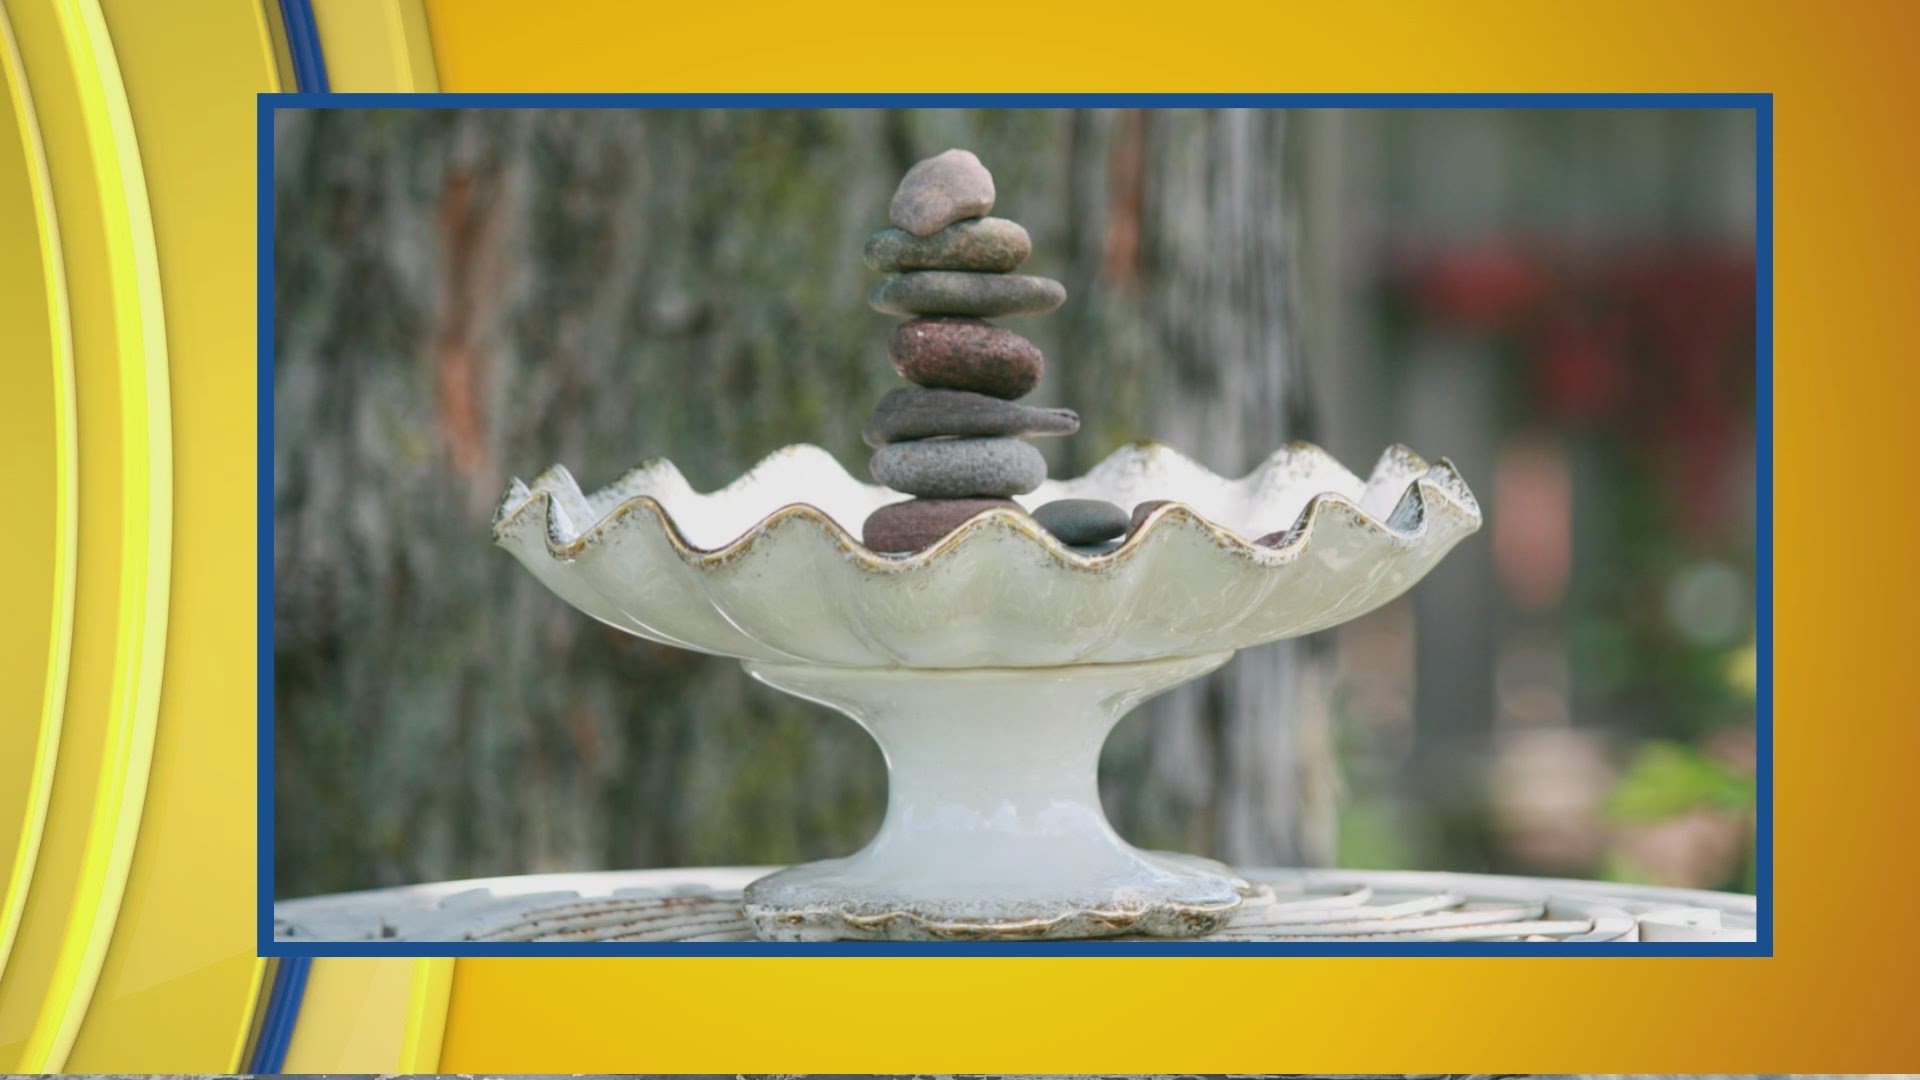 Michele shows us the art of stone stacking as a form of relaxation